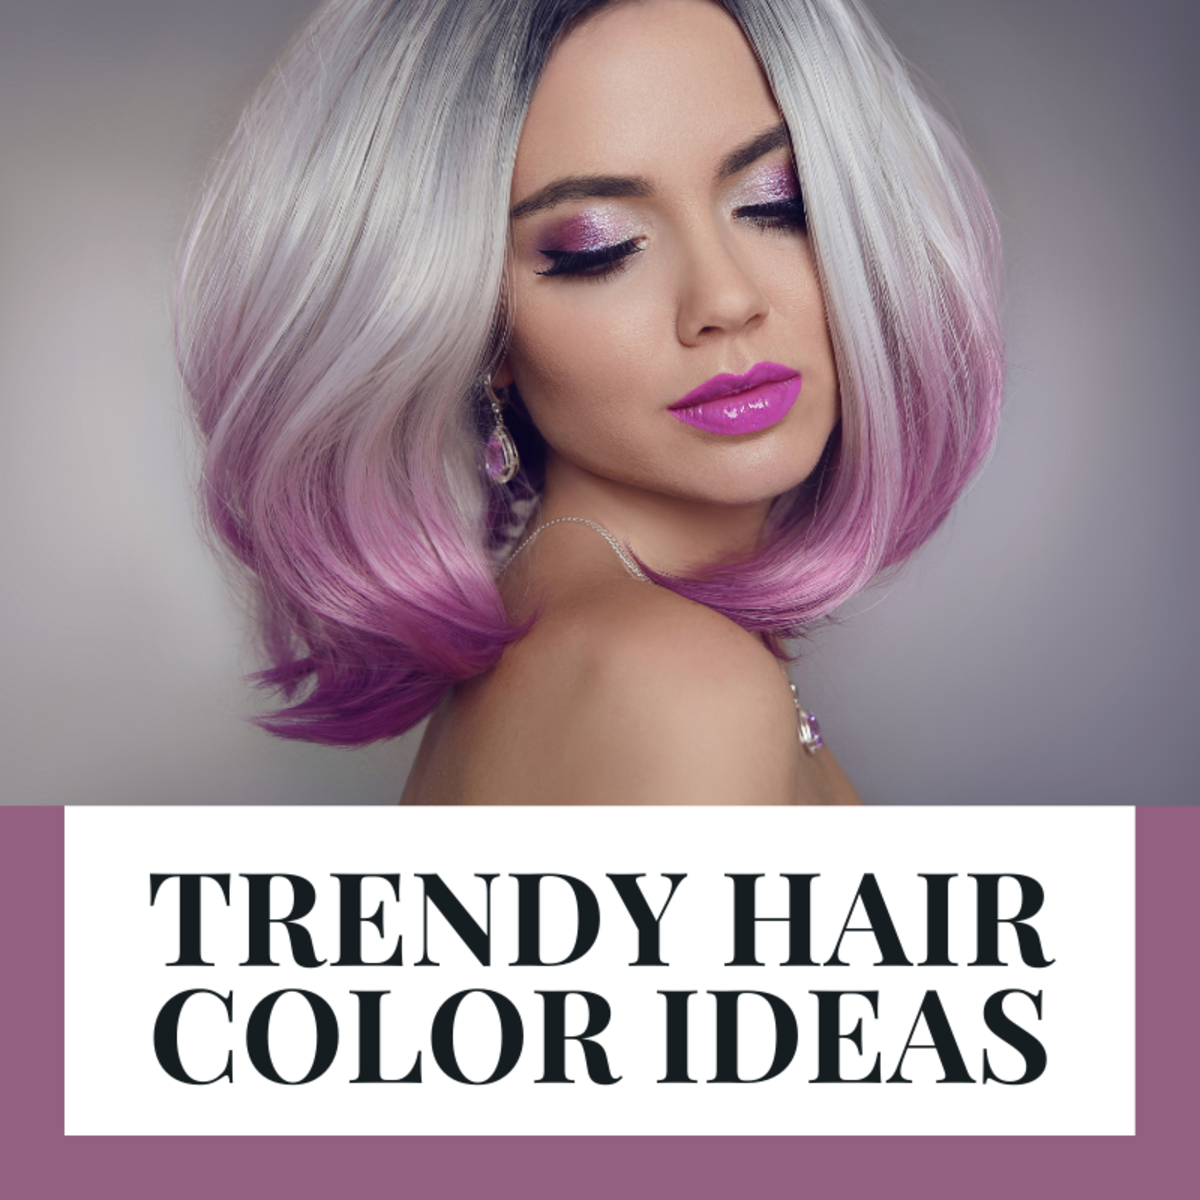 Trendy Hair-Color Ideas (Balayage, Ombre, and More!)